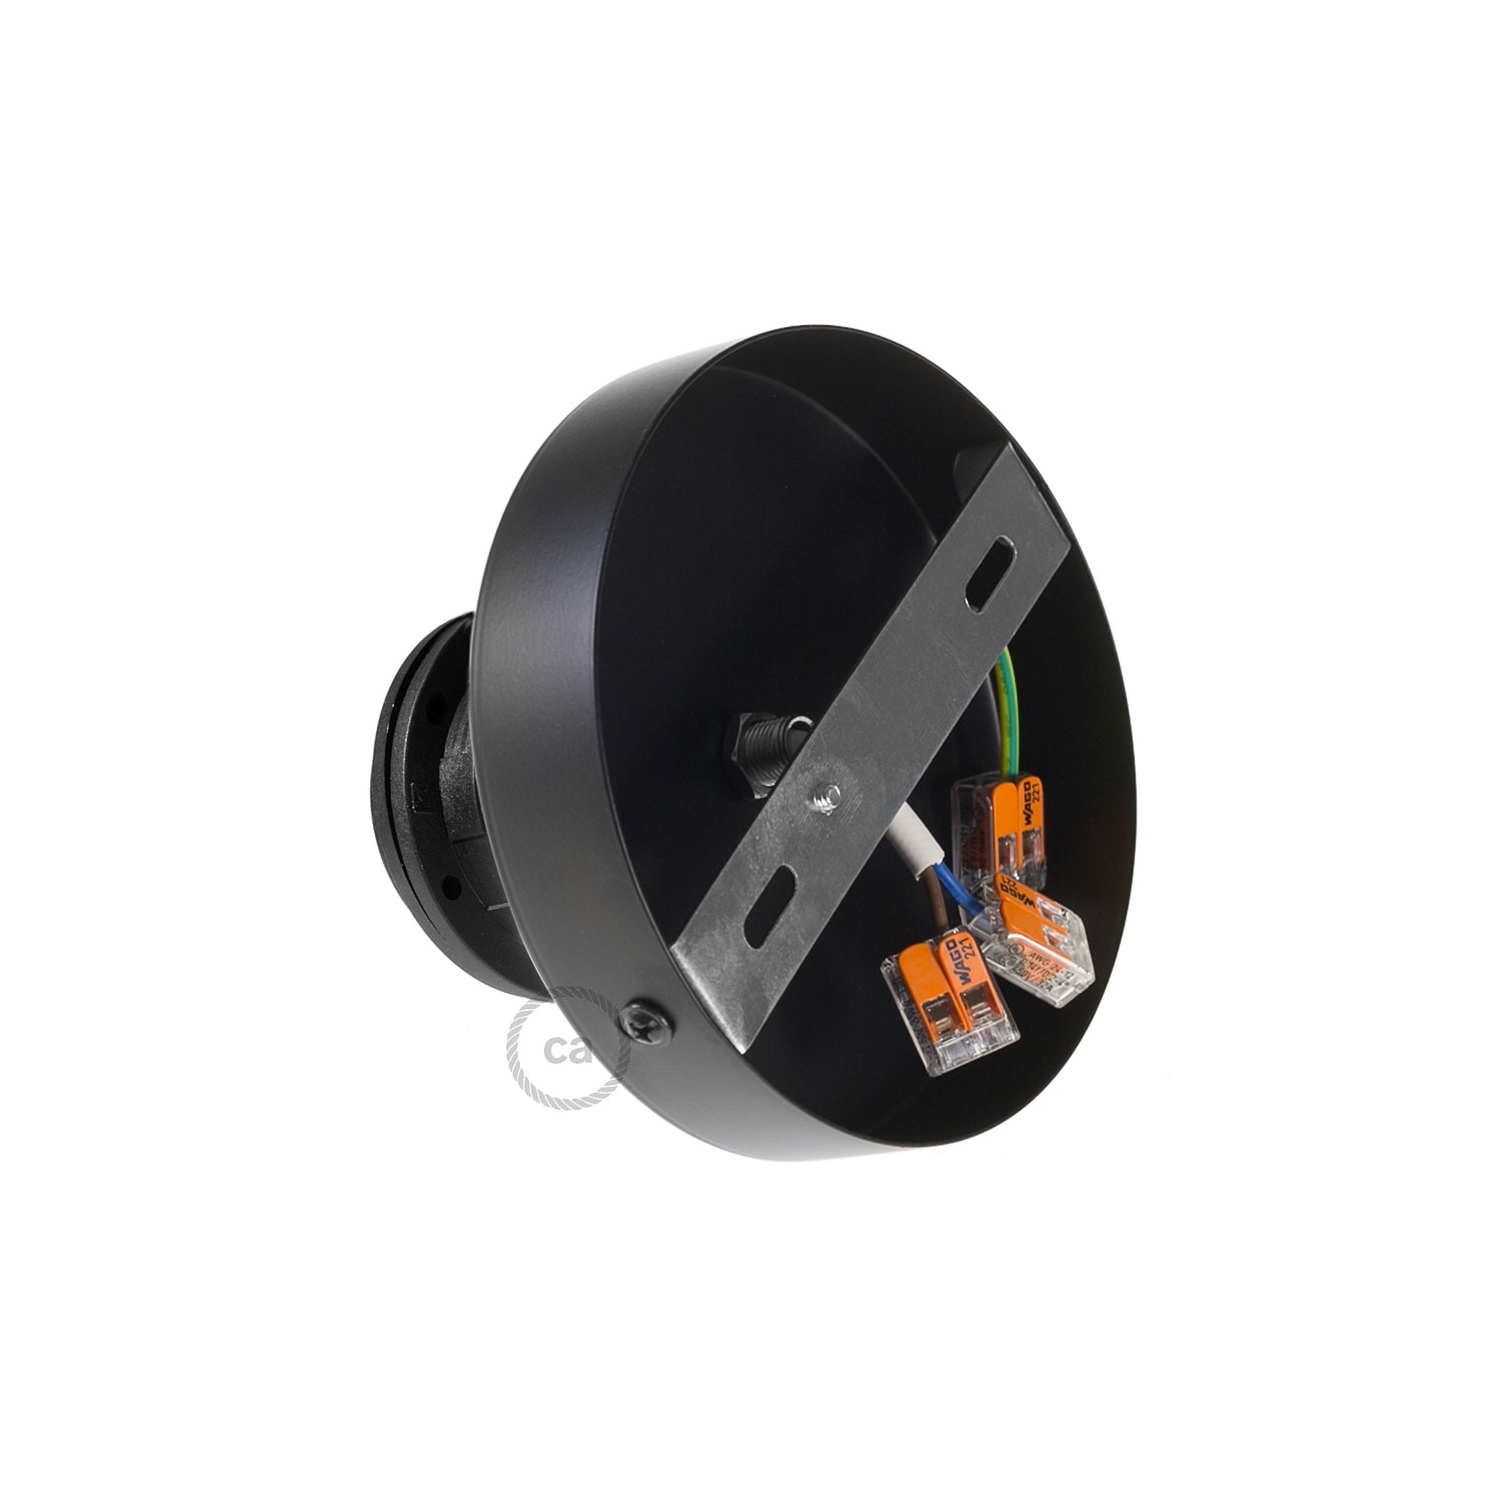 Fermaluce Black metal, with E26 threaded lamp holder, the metal wall or ceiling light source